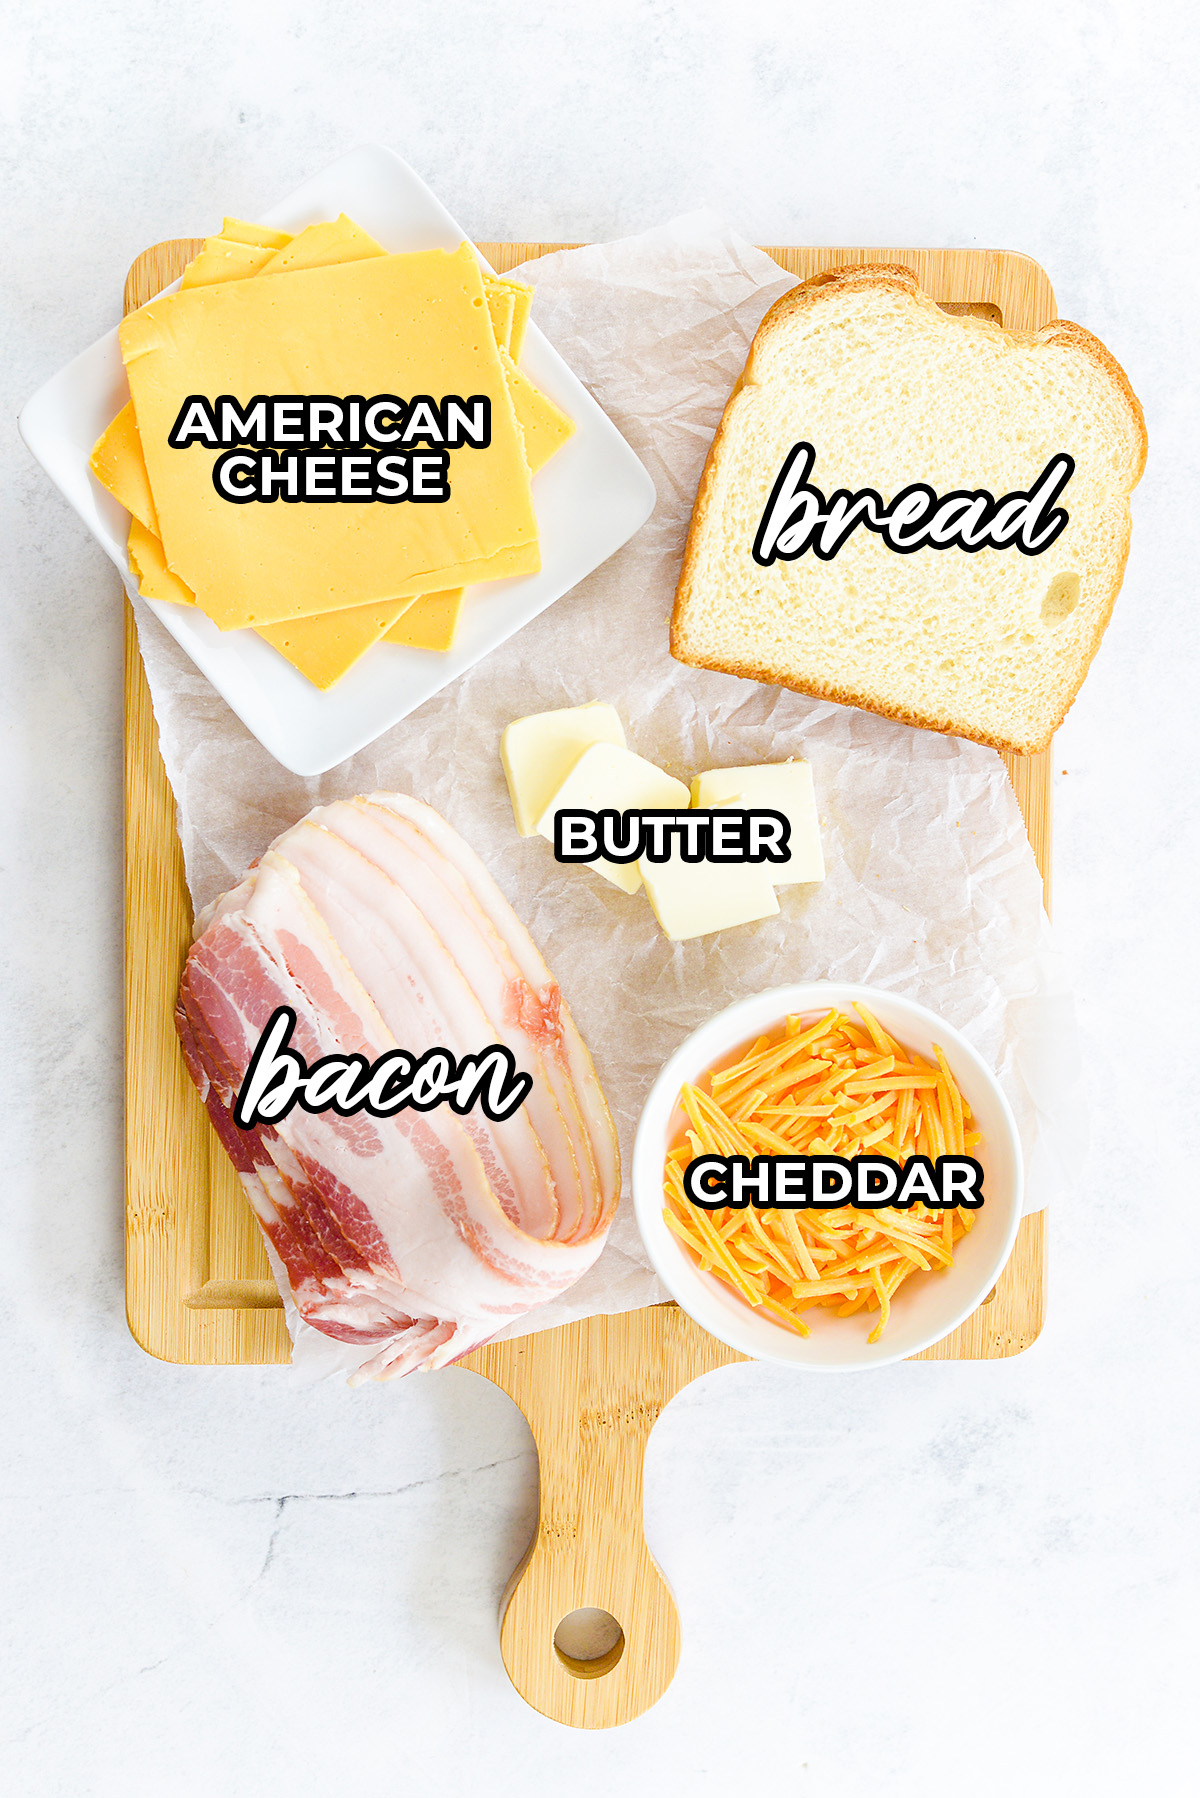 Bacon grilled cheese ingredients on a wooden cutting board.